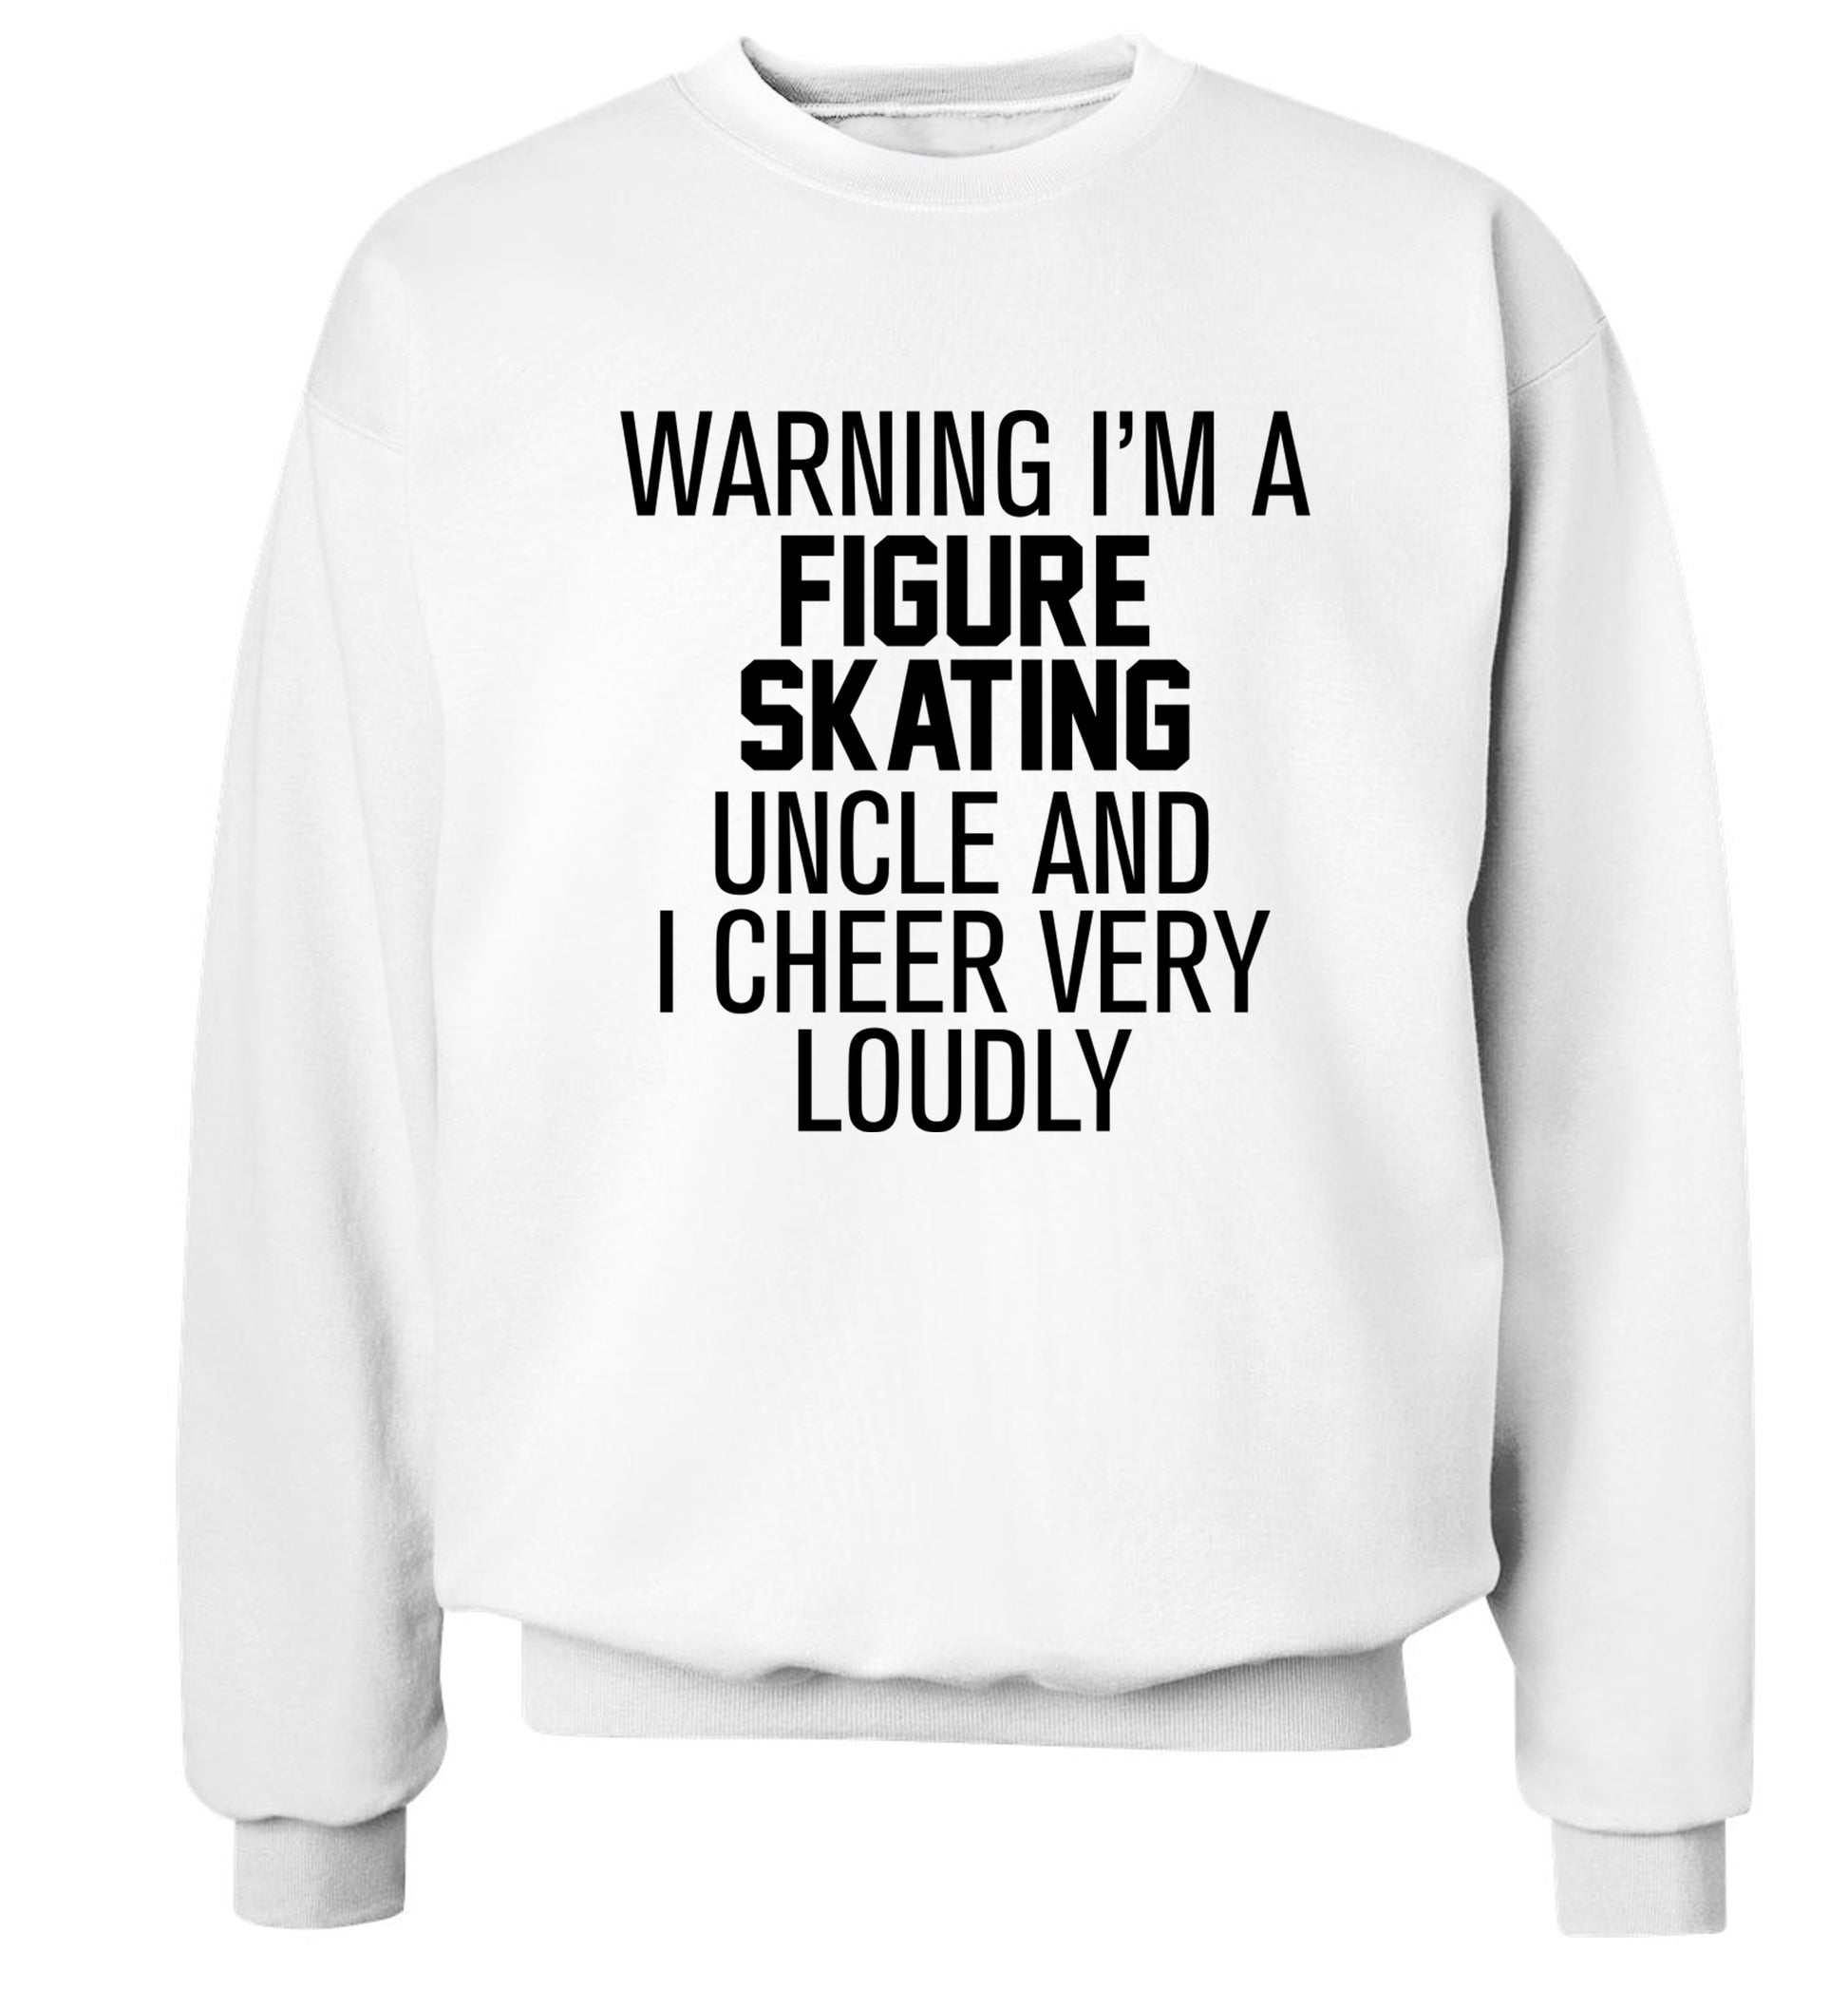 Warning I'm a figure skating uncle and I cheer very loudly Adult's unisexwhite Sweater 2XL